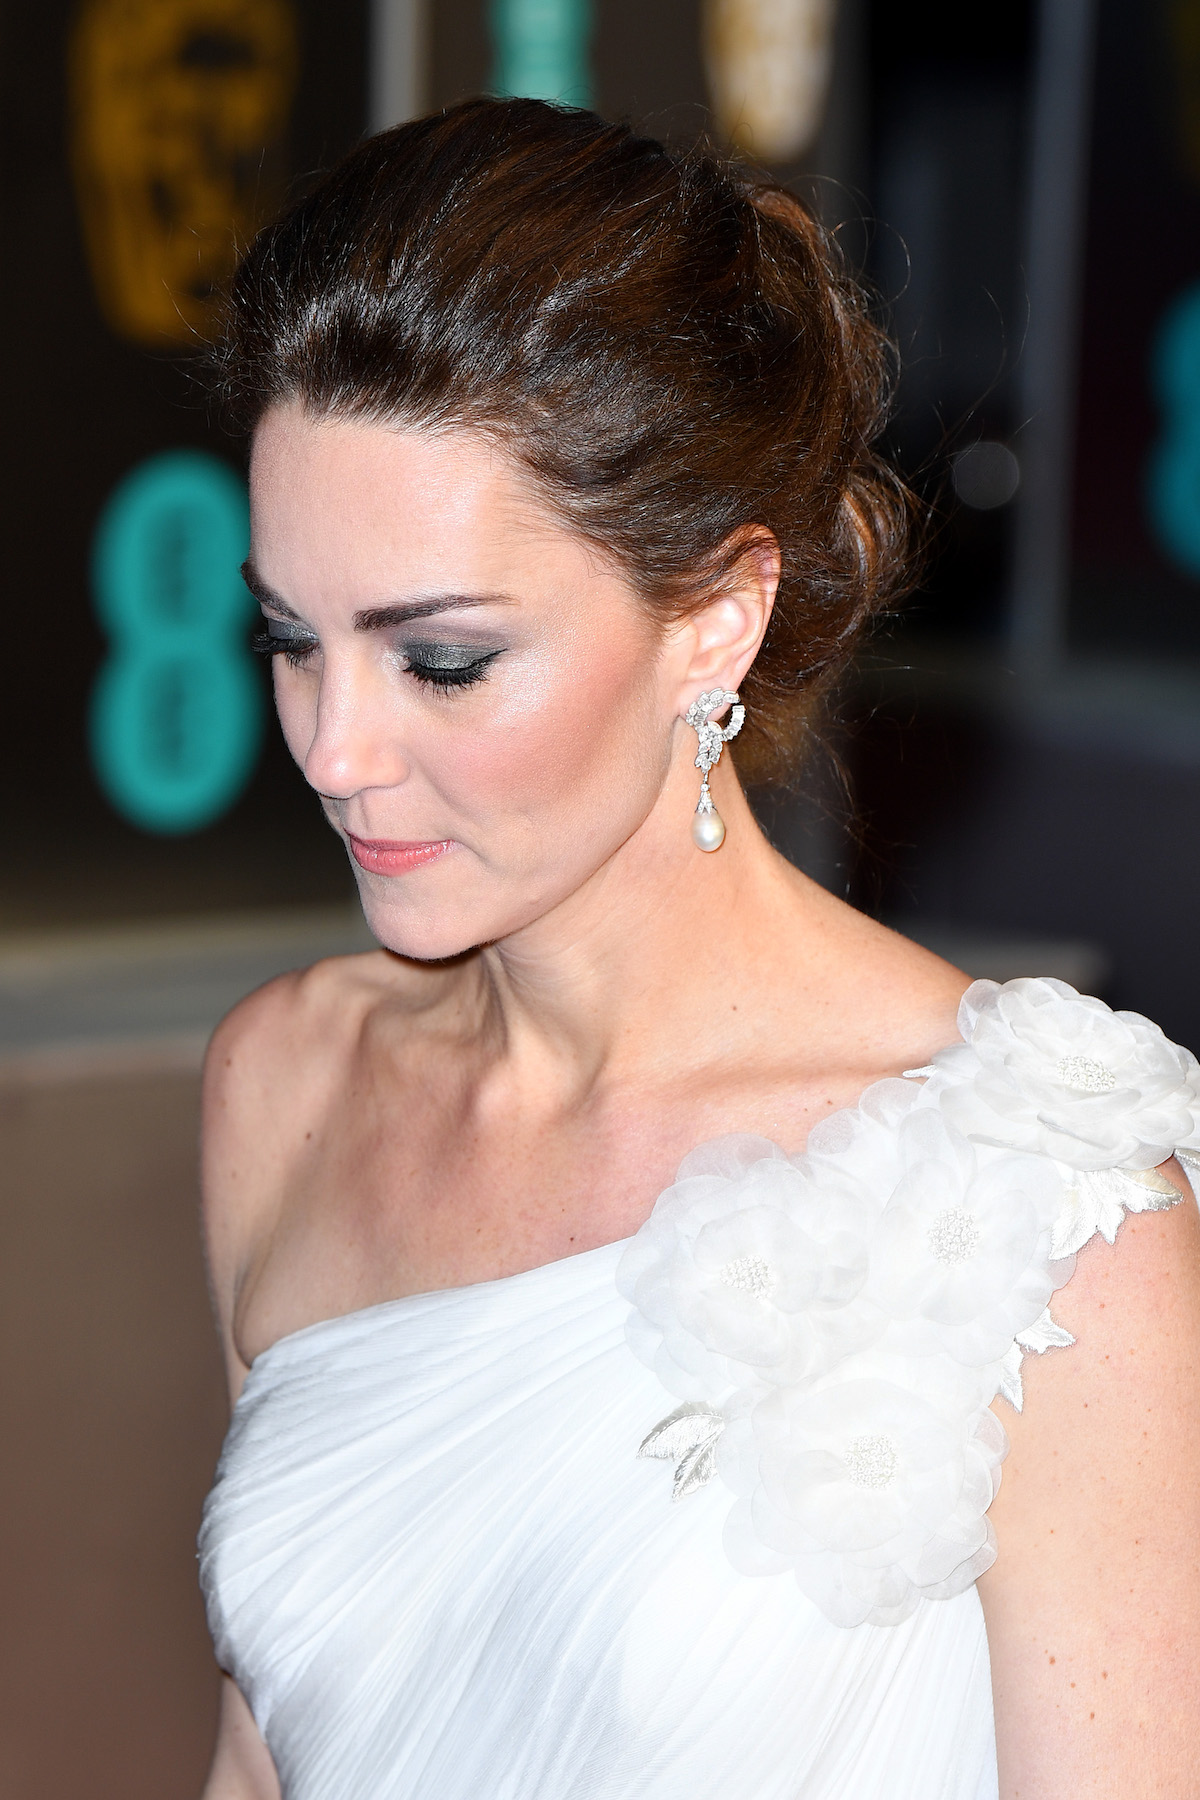 Catherine, Duchess of Cambridge attends the EE British Academy Film Awards at Royal Albert Hall on February 10, 2019 in London, England. (Photo by Pascal Le Segretain/Getty Images)